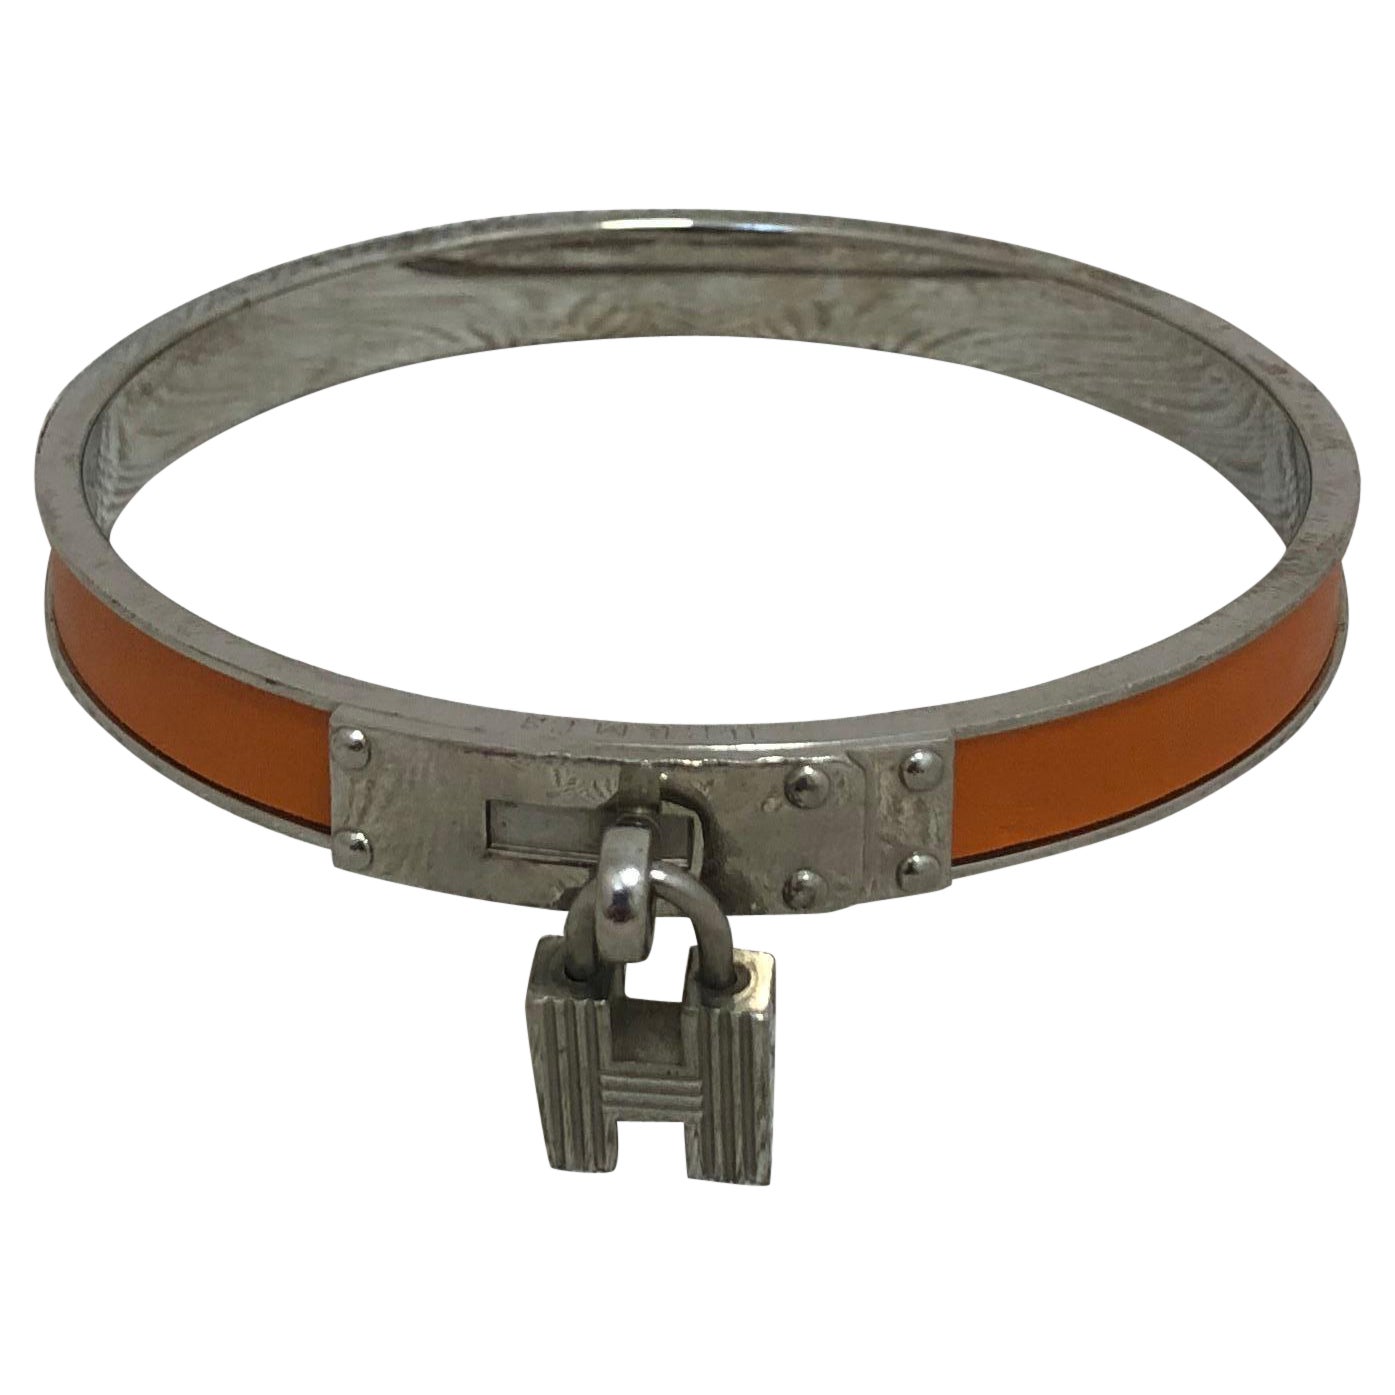 Hermes Kelly H Lock Bangle in Palladium and Leather w/Pouch